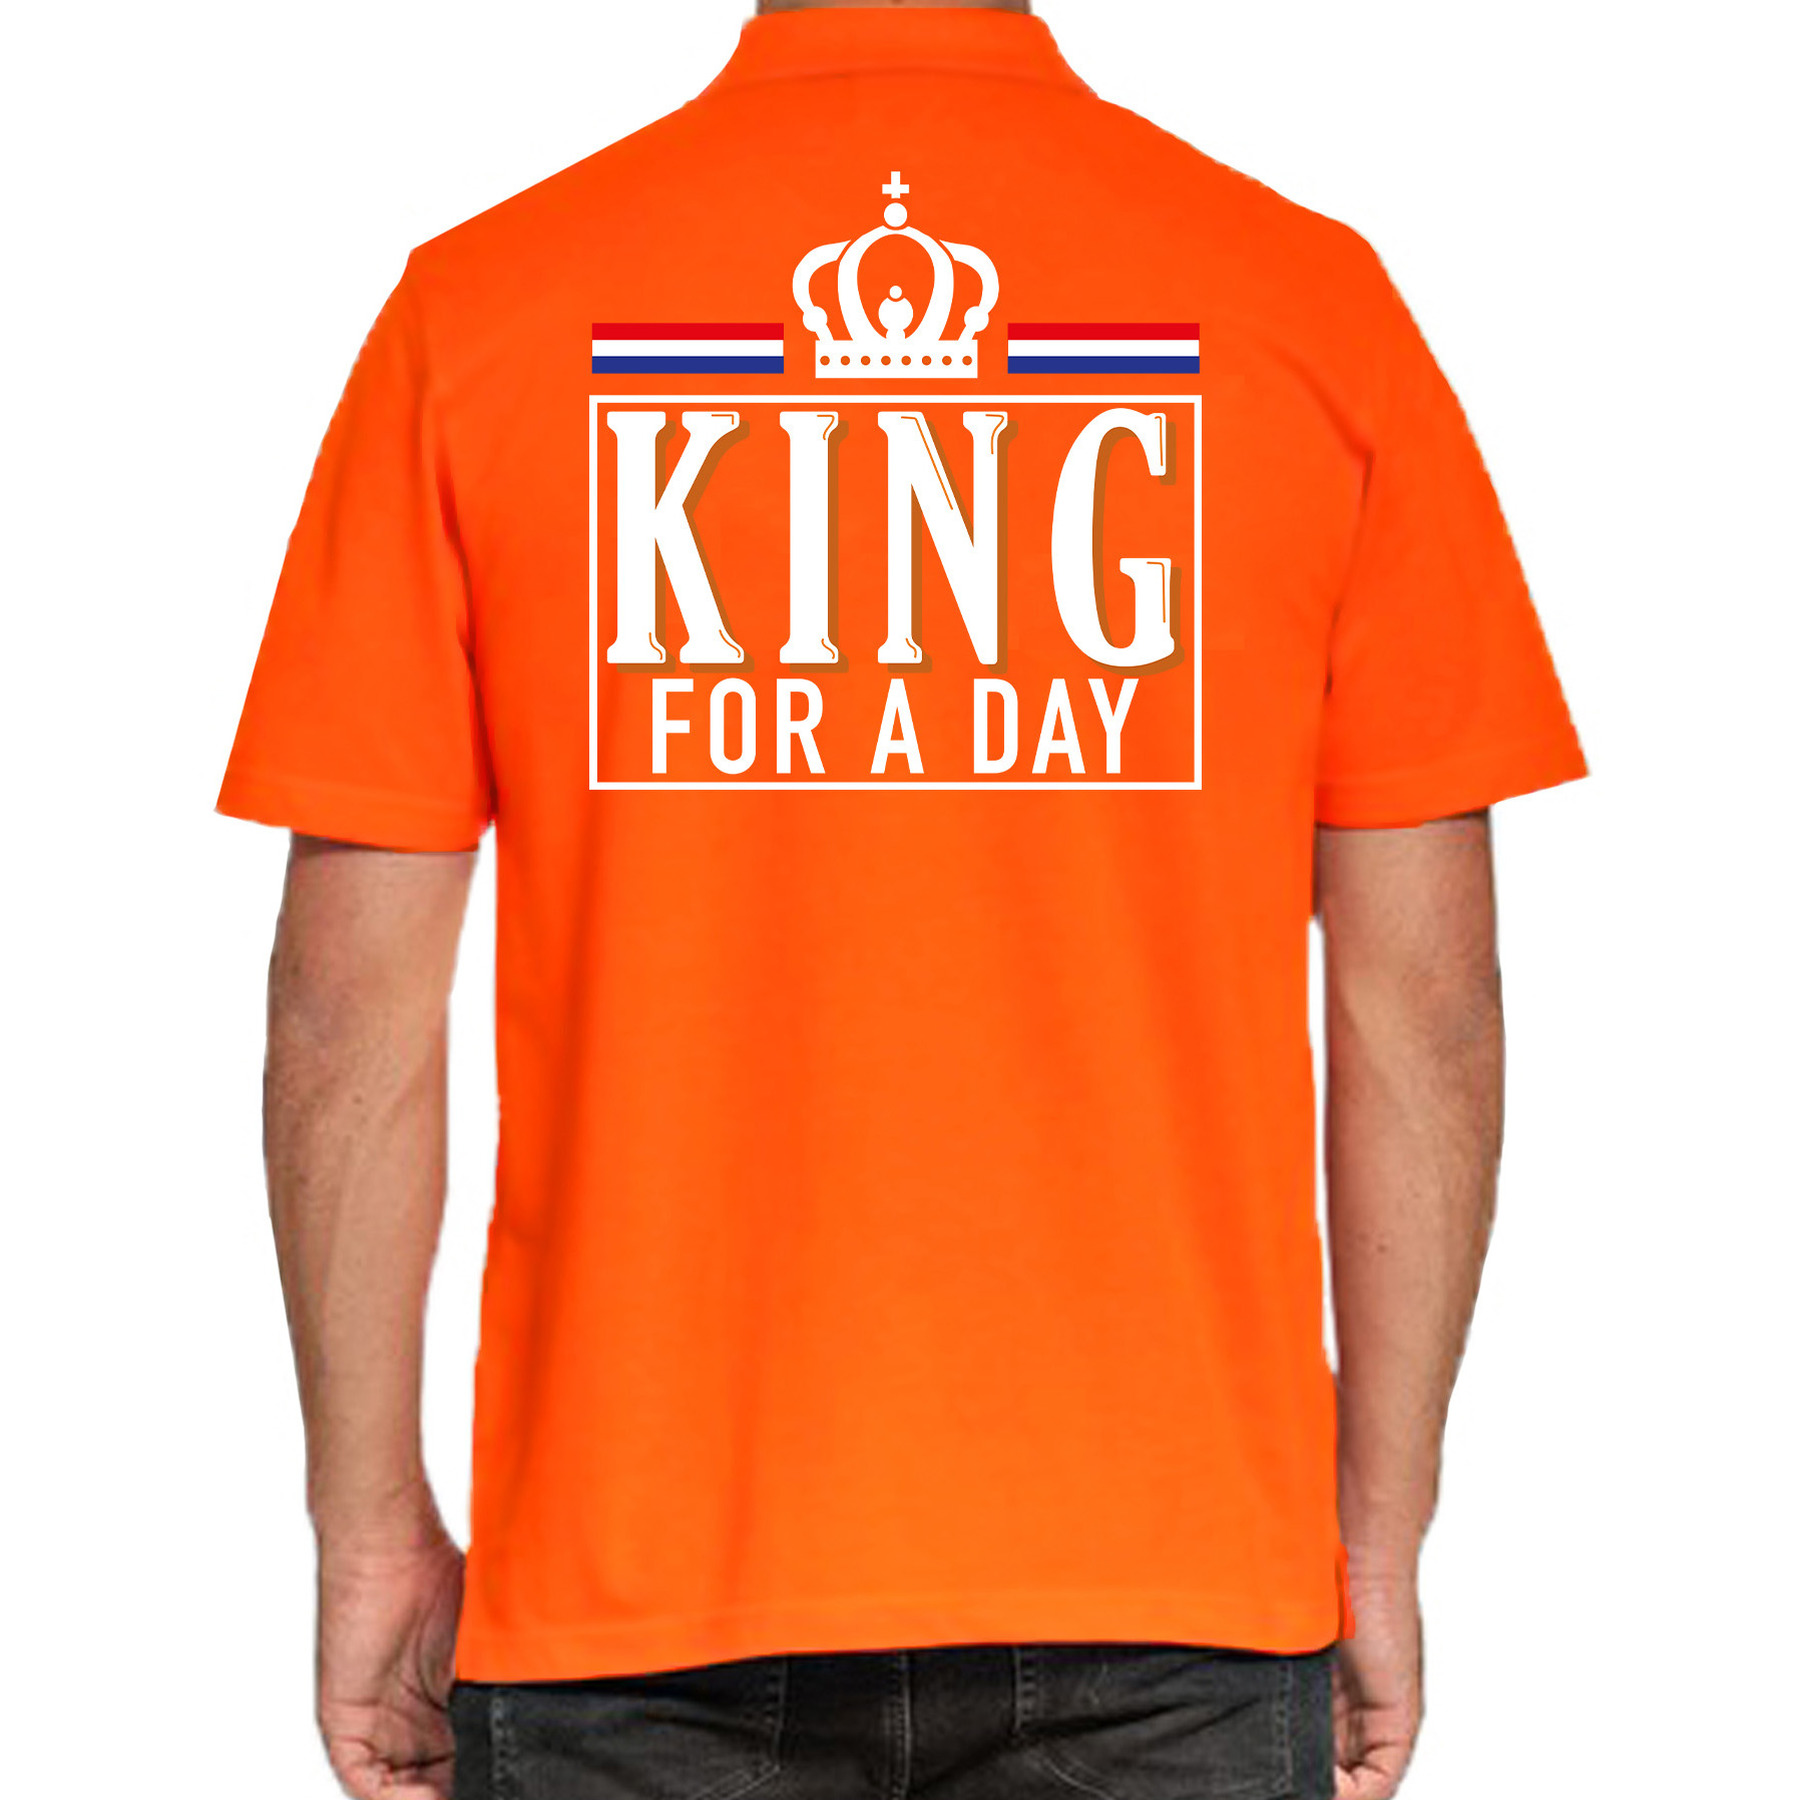 King for a day polo shirt oranje voor heren - Koningsdag polo shirts